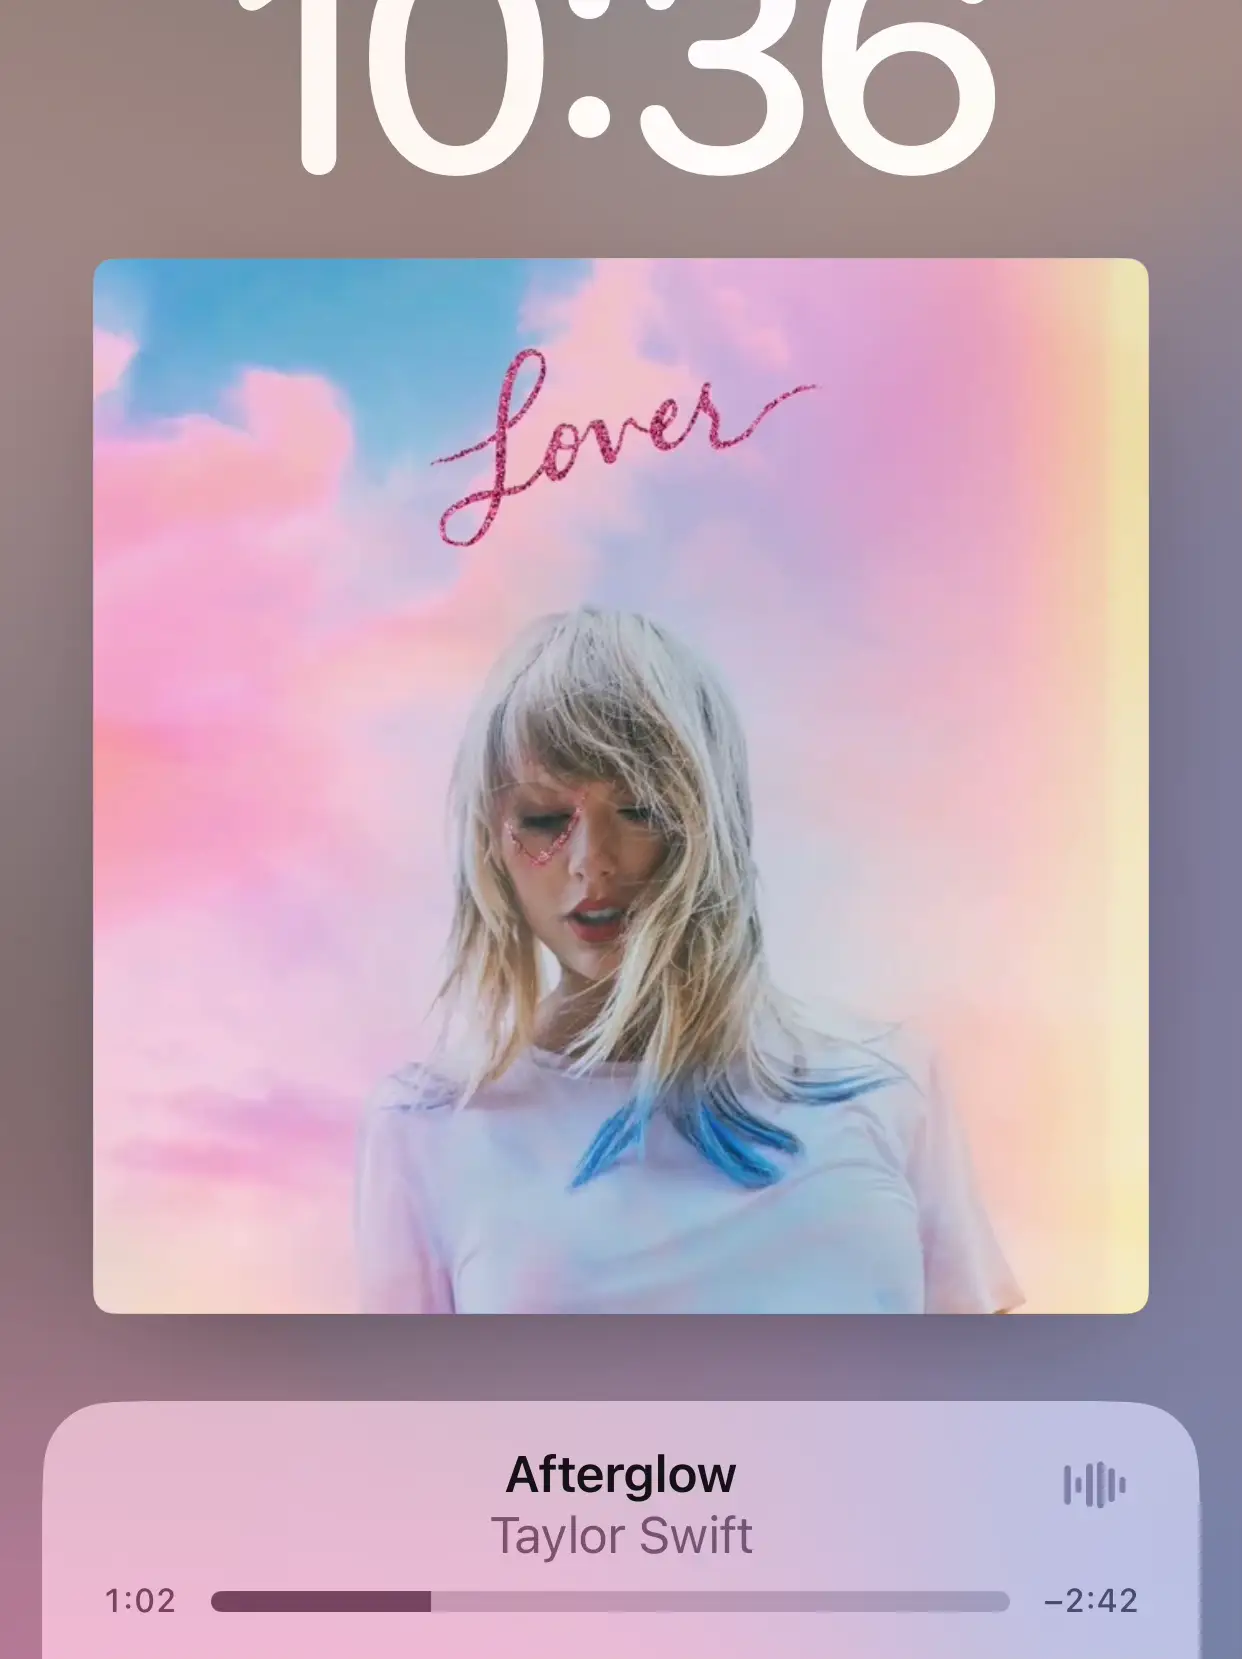  A phone screen displaying a Taylor Swift song.